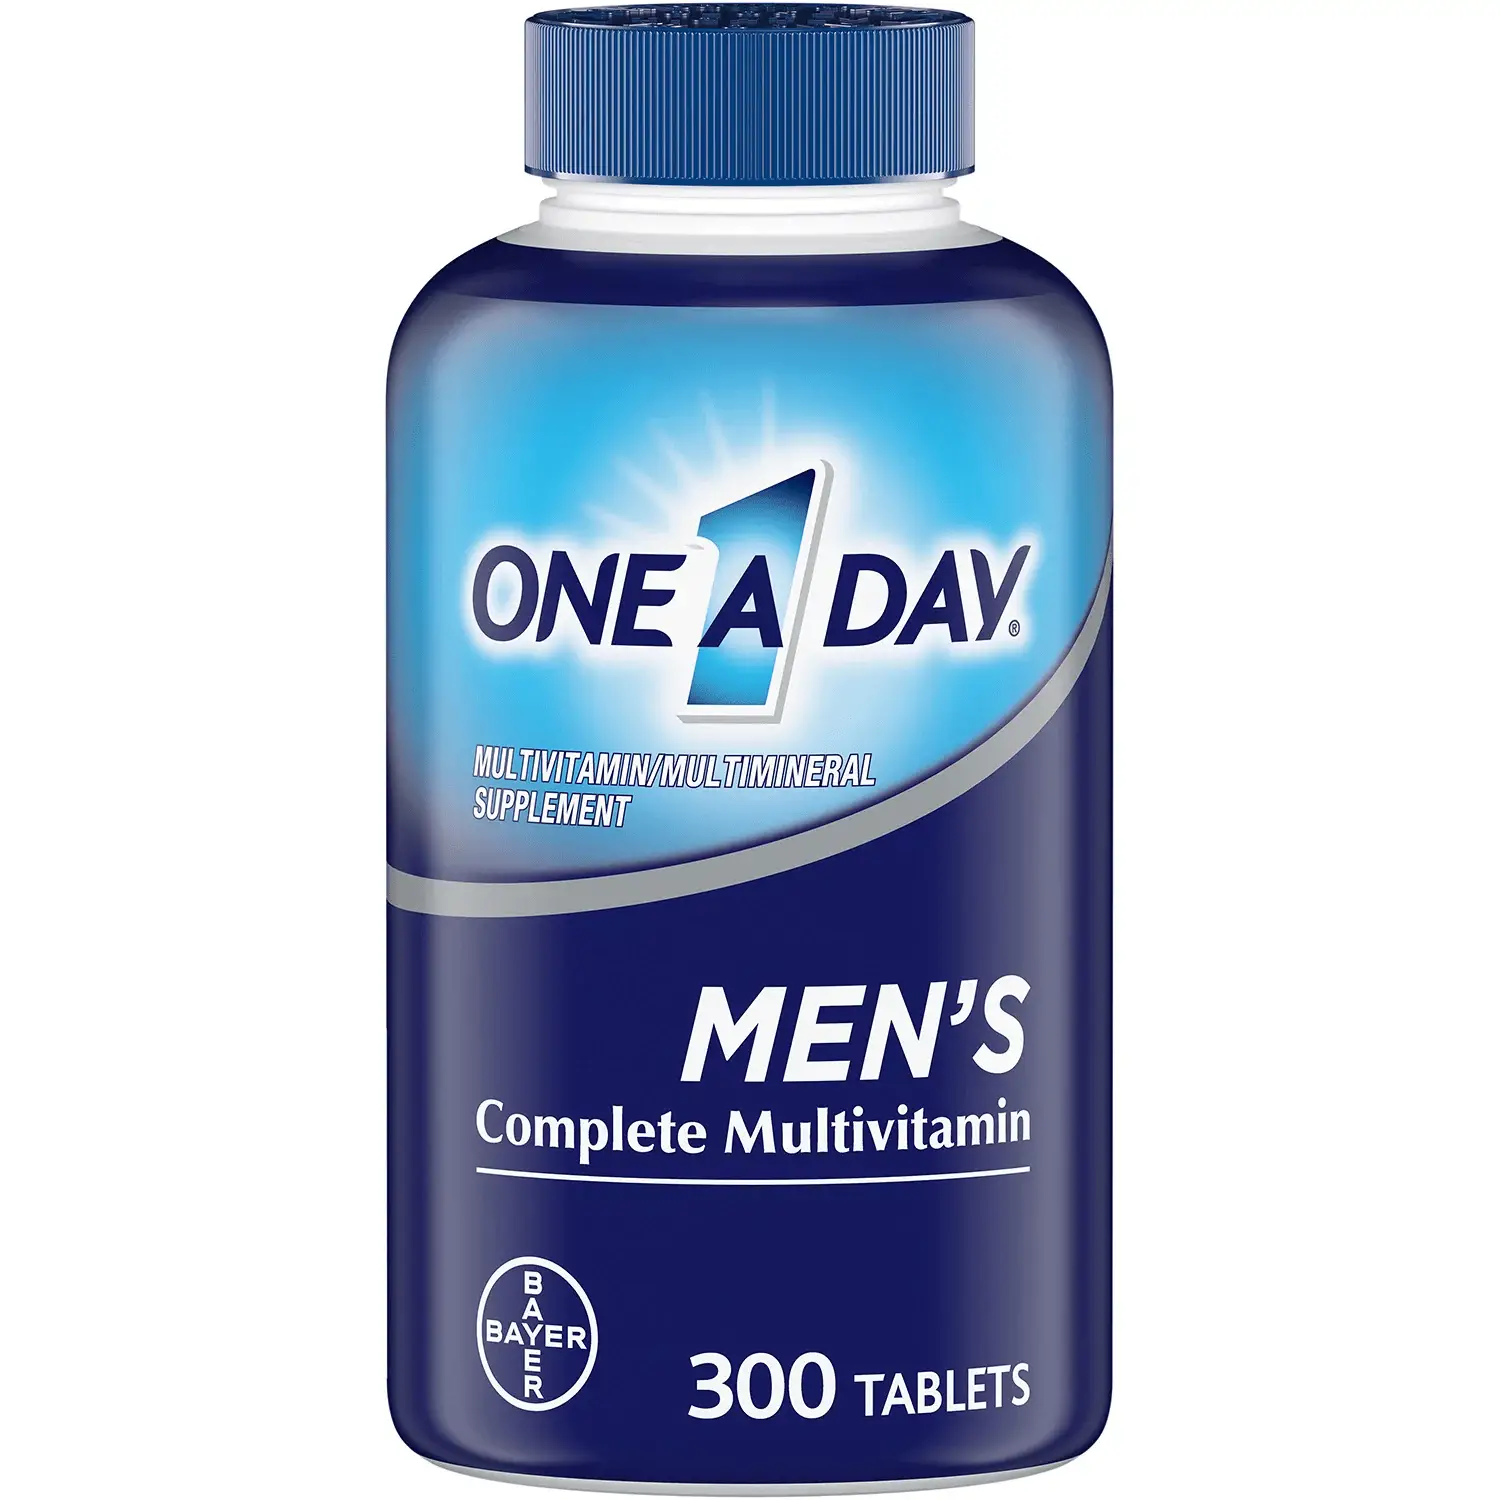 One A Day Men